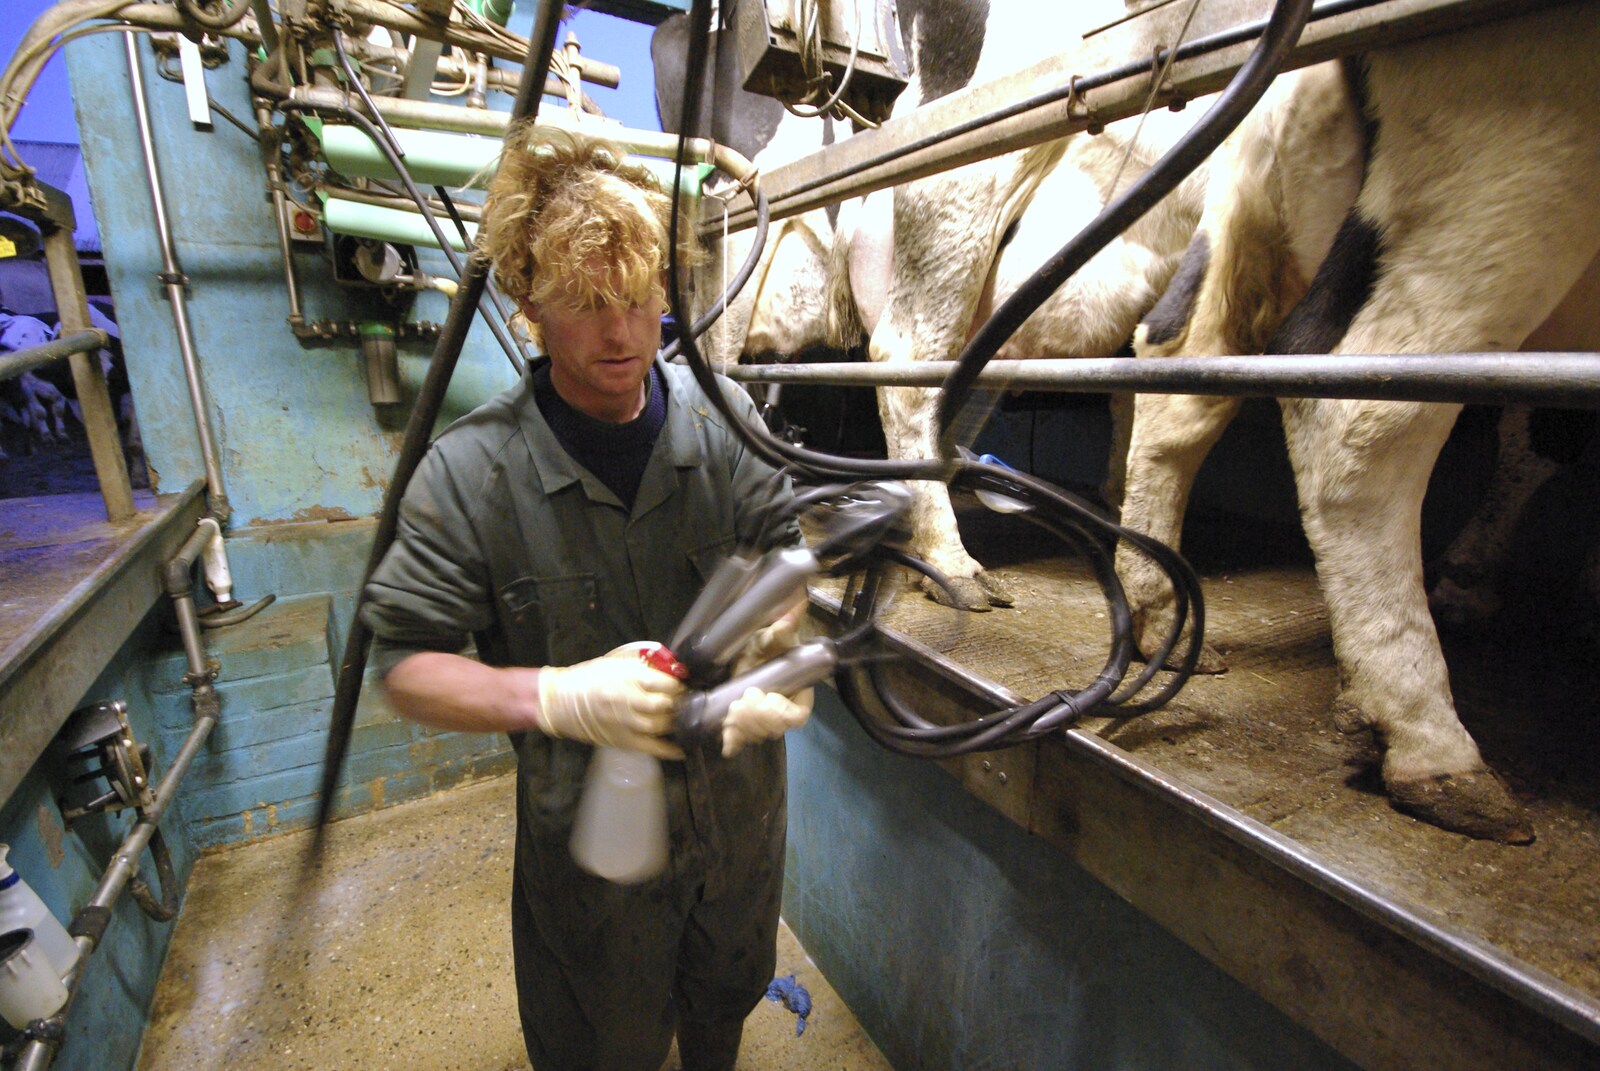 Wavy cleans out milking suckers from The Last Milking at Dairy Farm, Thrandeston, Suffolk - 11th January 2007